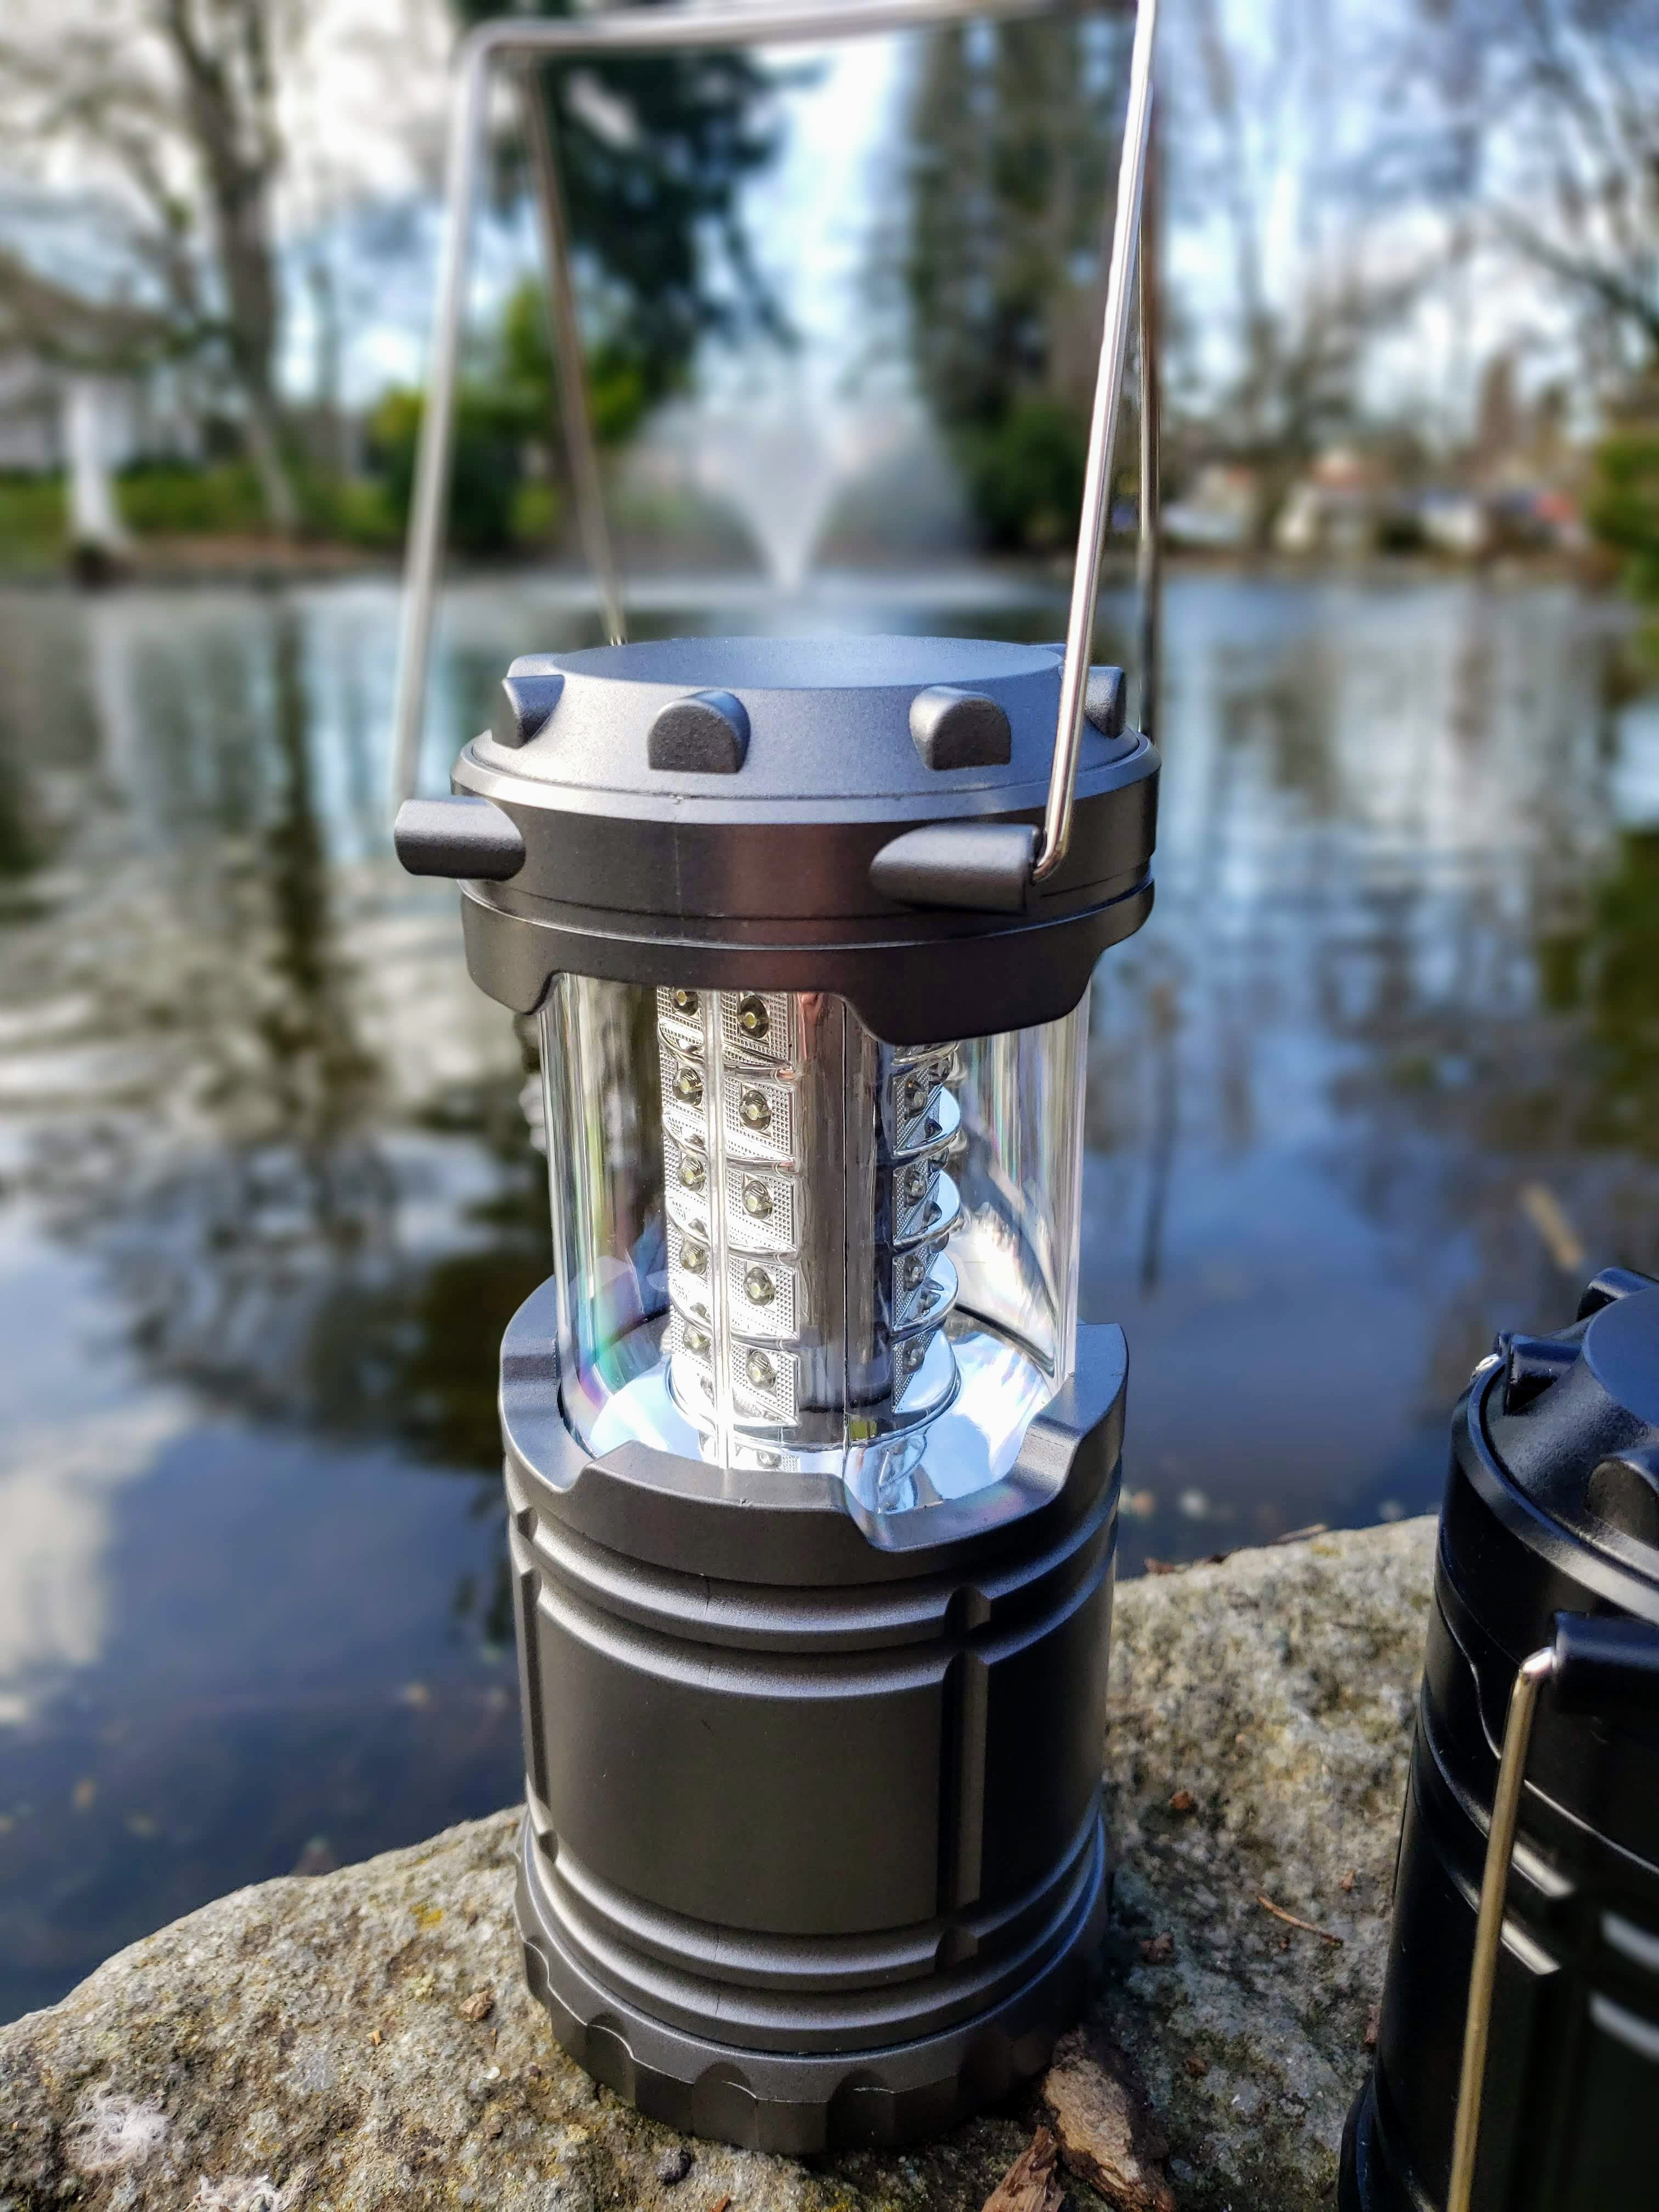 Compact Camping Lantern Light- 30 LED, , Pacific Rayne, Defiance Outdoor Gear Co.